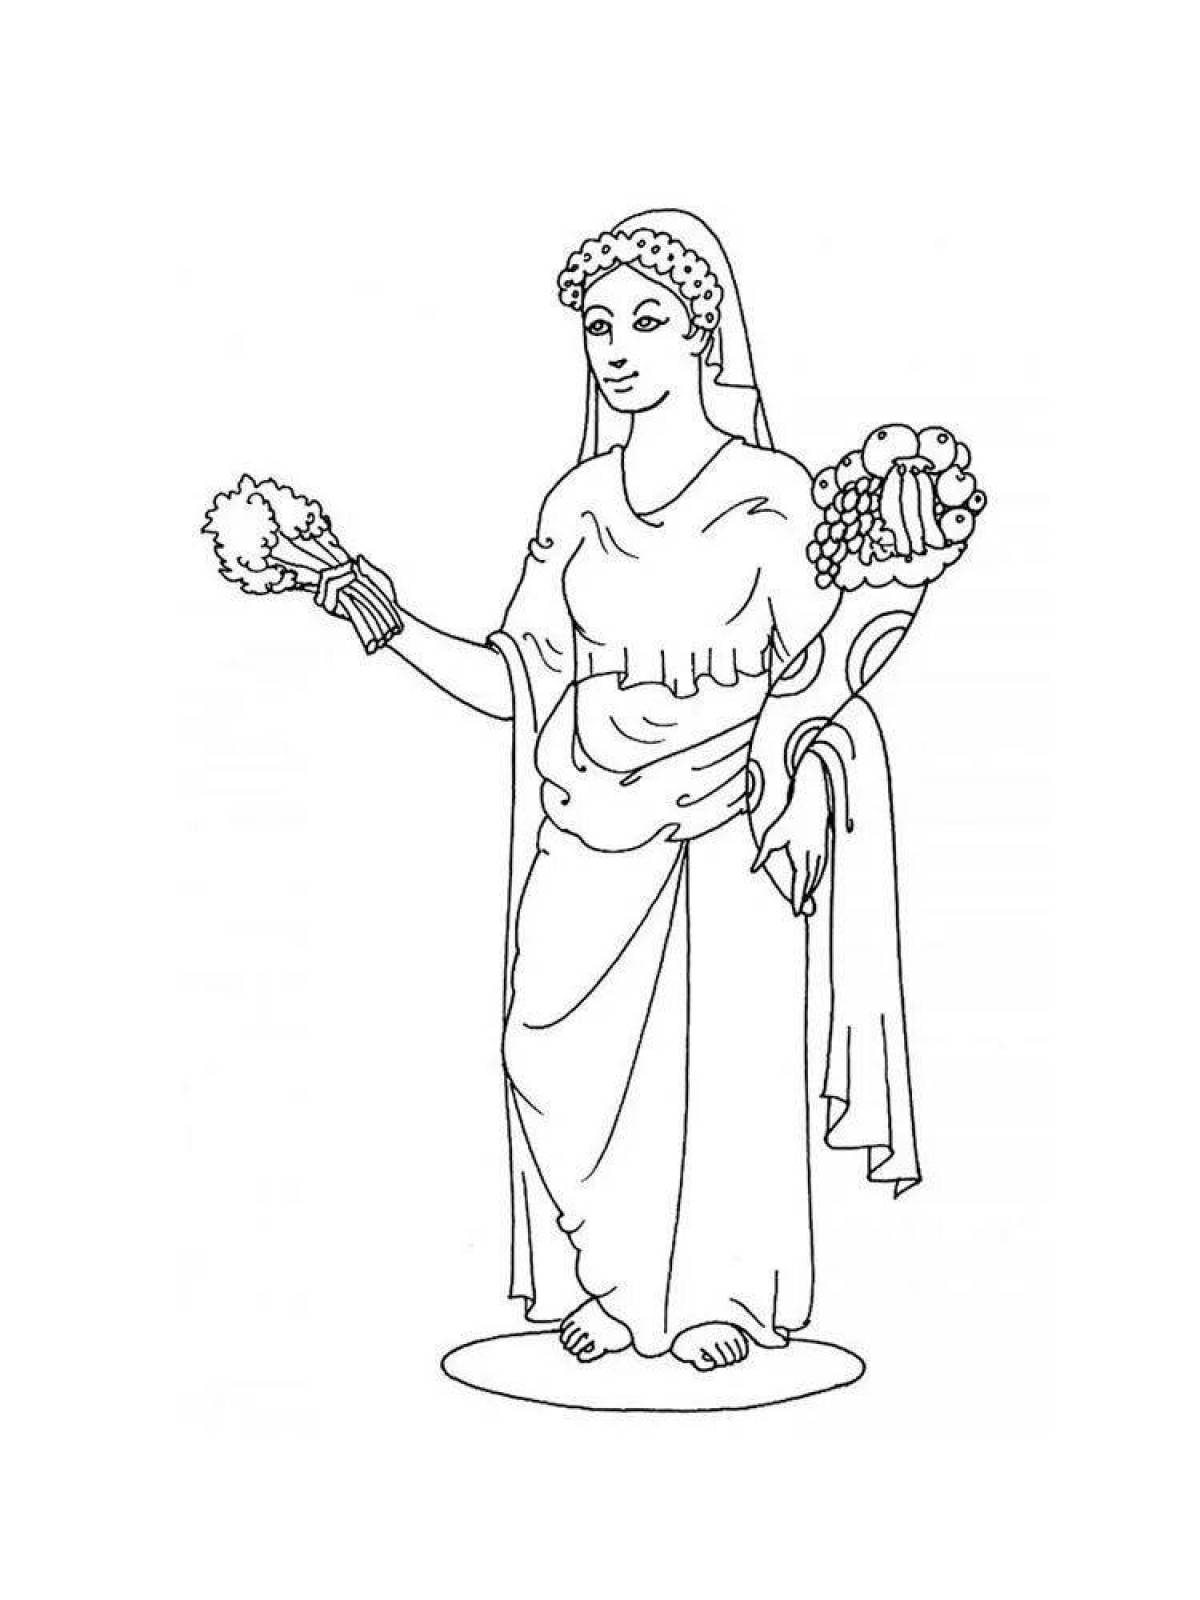 Hera's charming coloring book